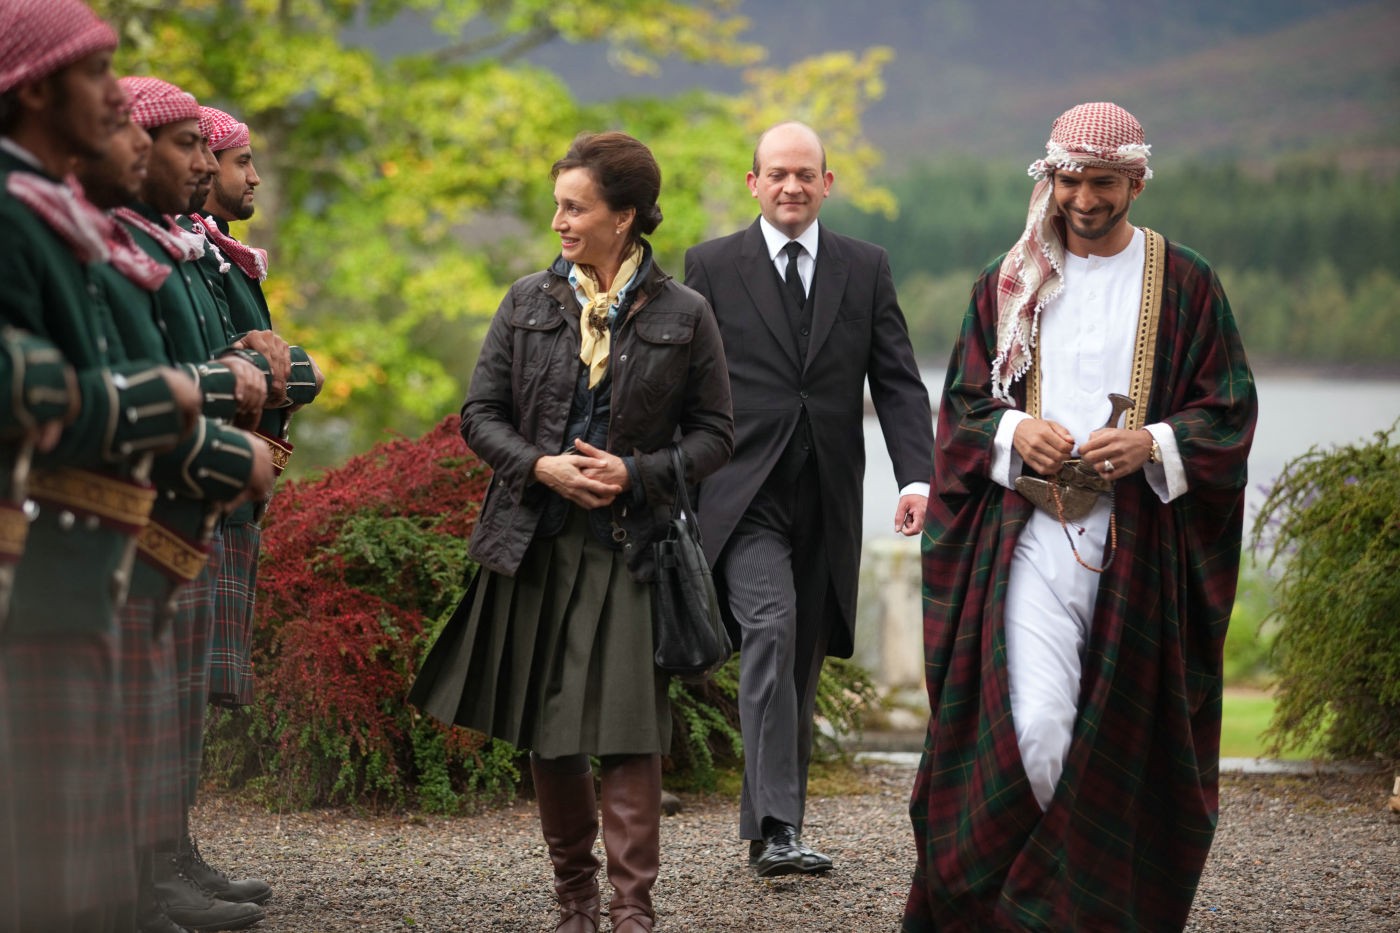 Kristin Scott Thomas stars as Patricia Maxwell and Amr Waked stars as Sheikh in CBS Films' Salmon Fishing in the Yemen (2012)